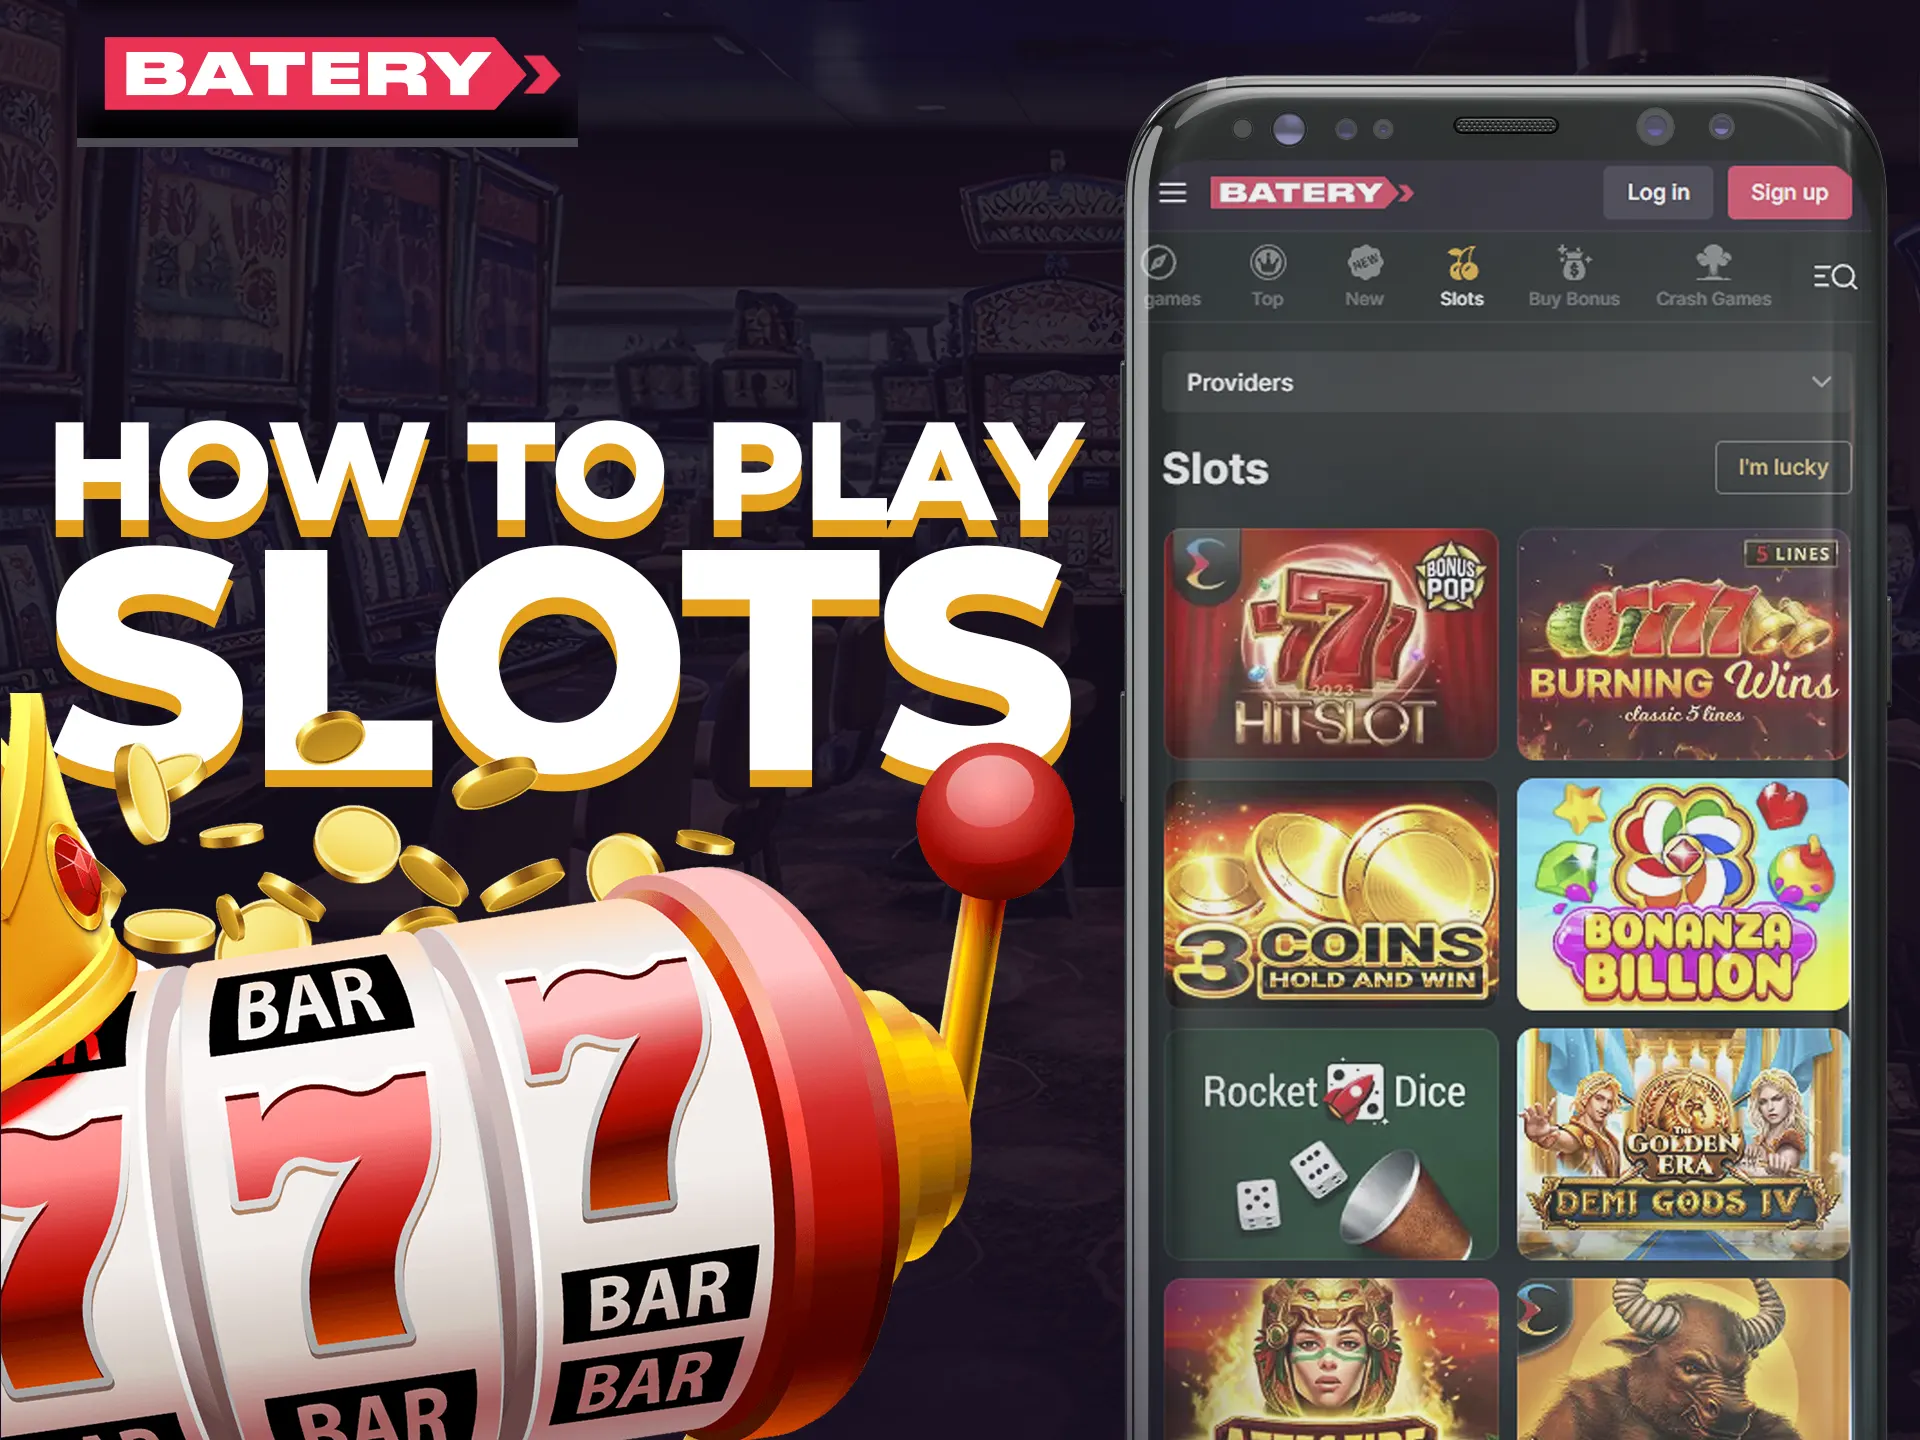 To start playing slots on Batery App you need to register, log in and choose a slot.